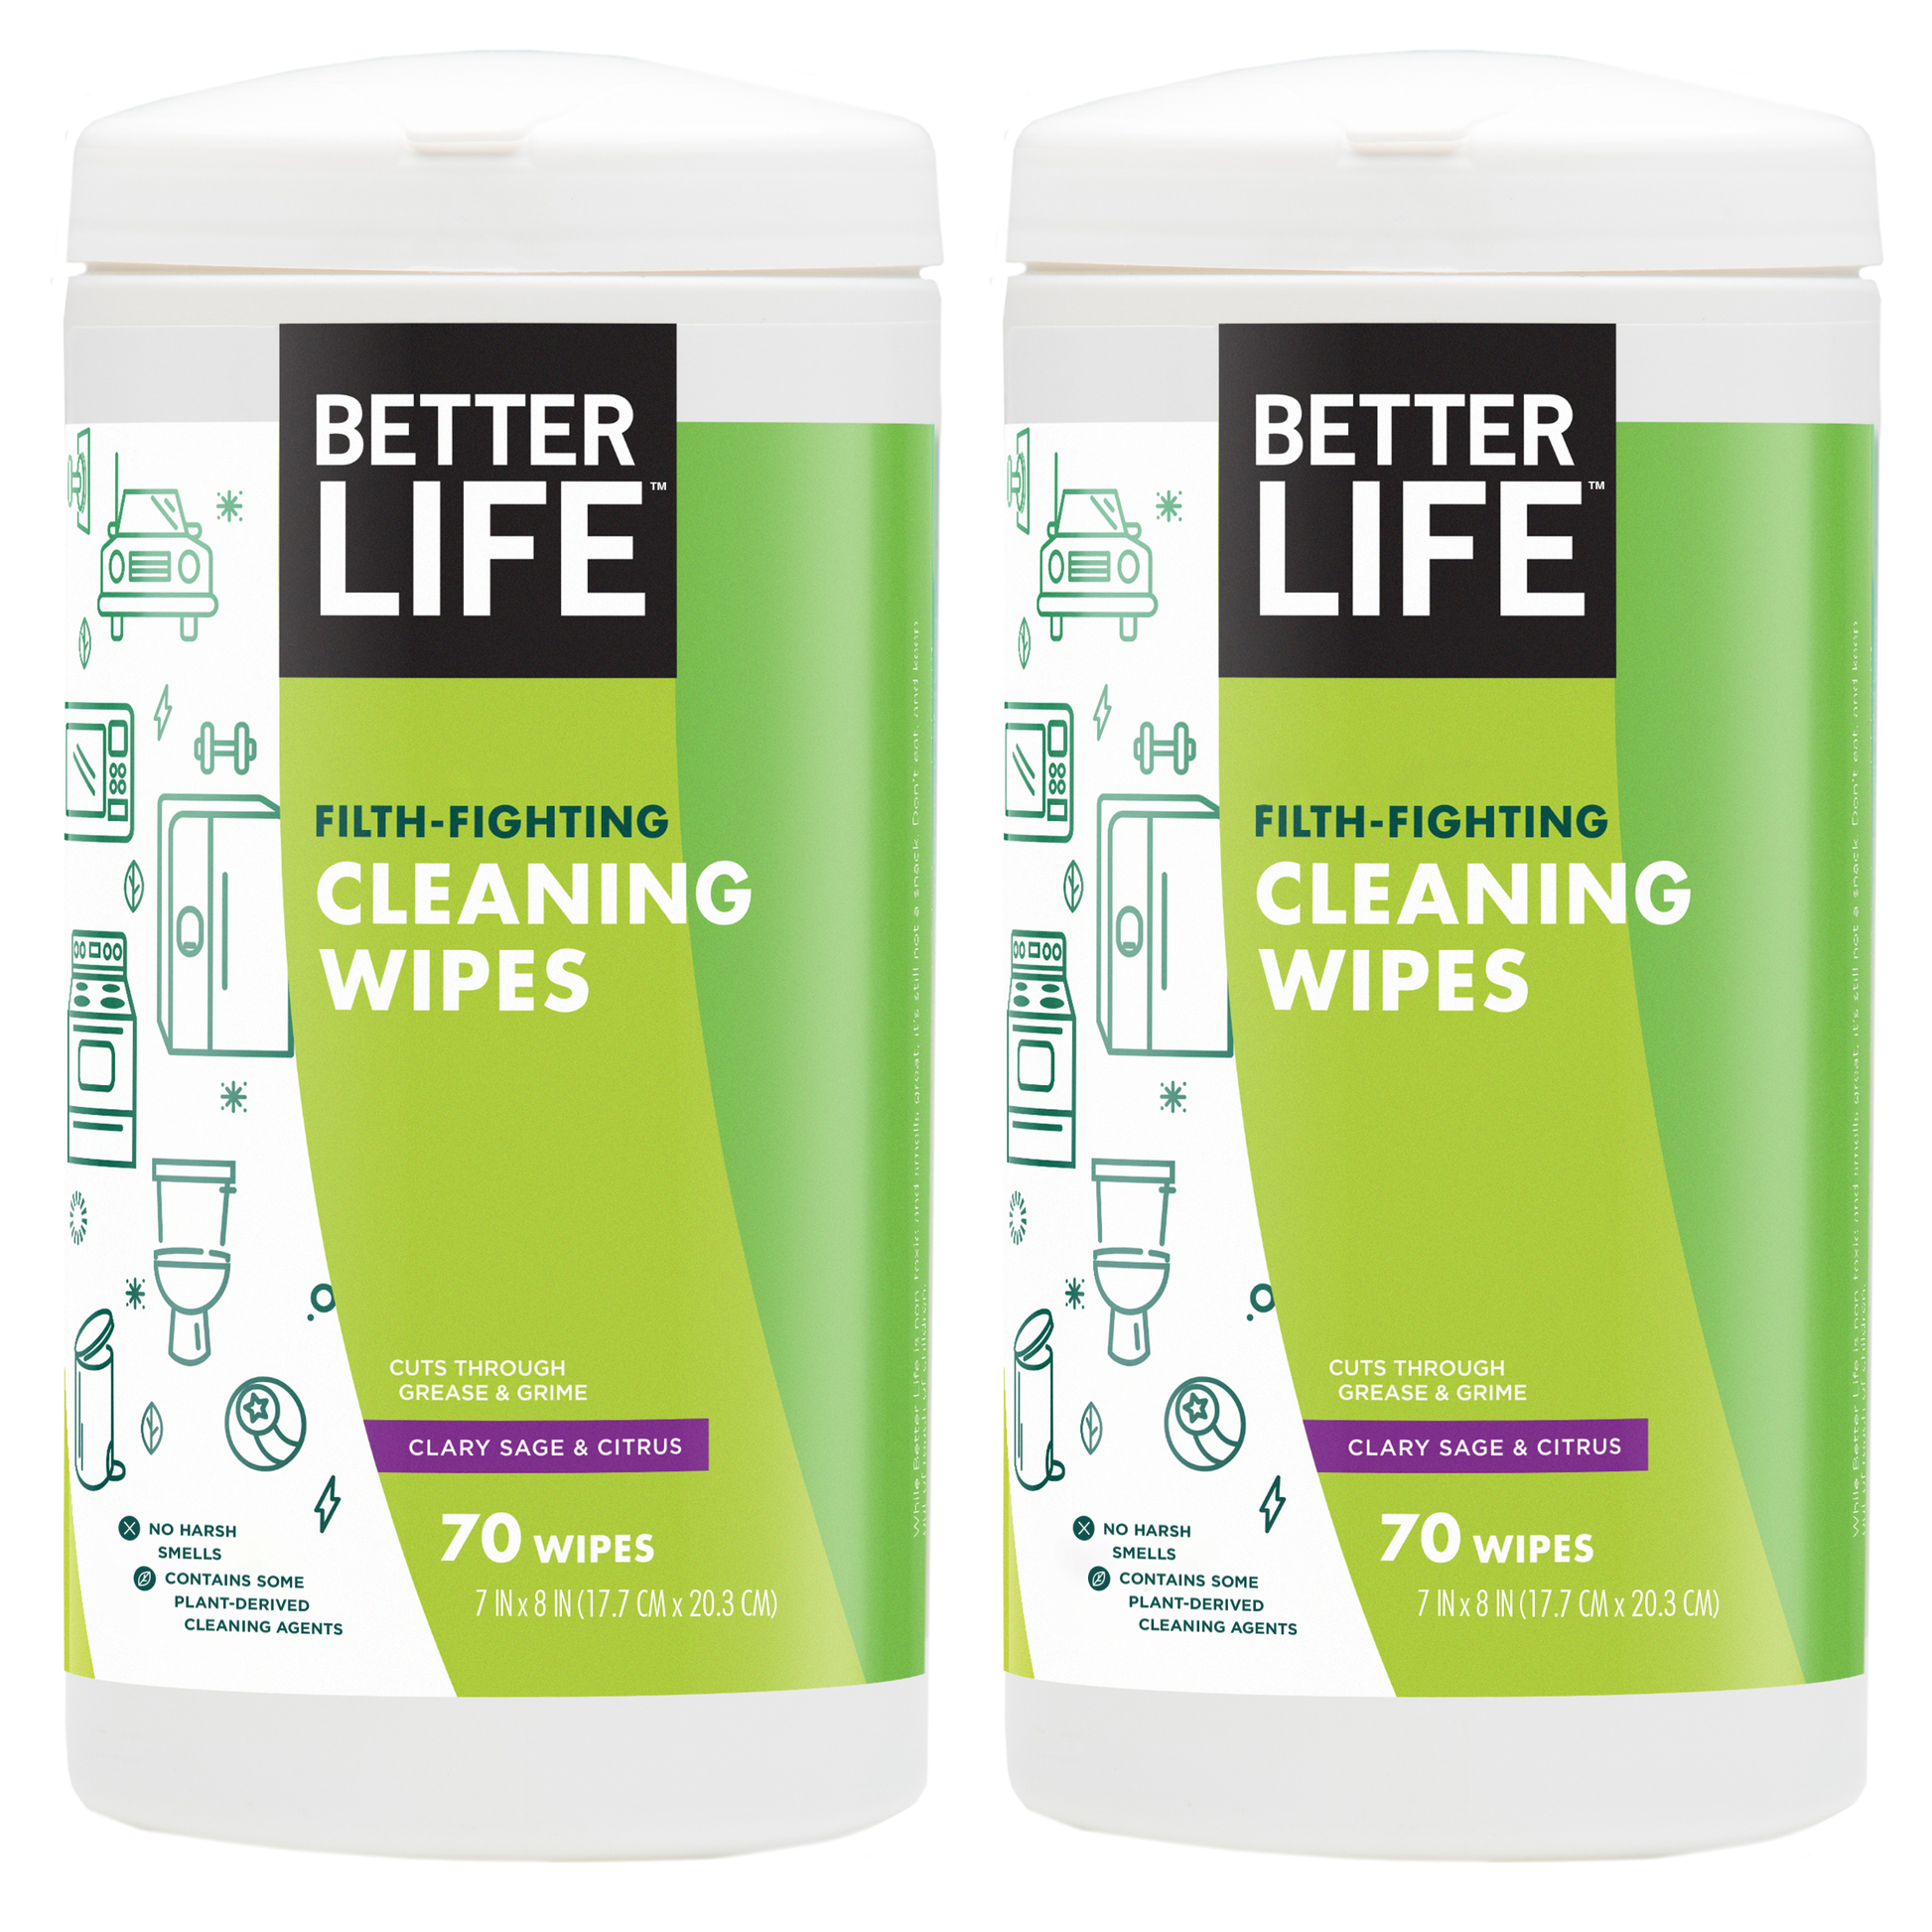 Better Life cleaning wipes - Pack of 2